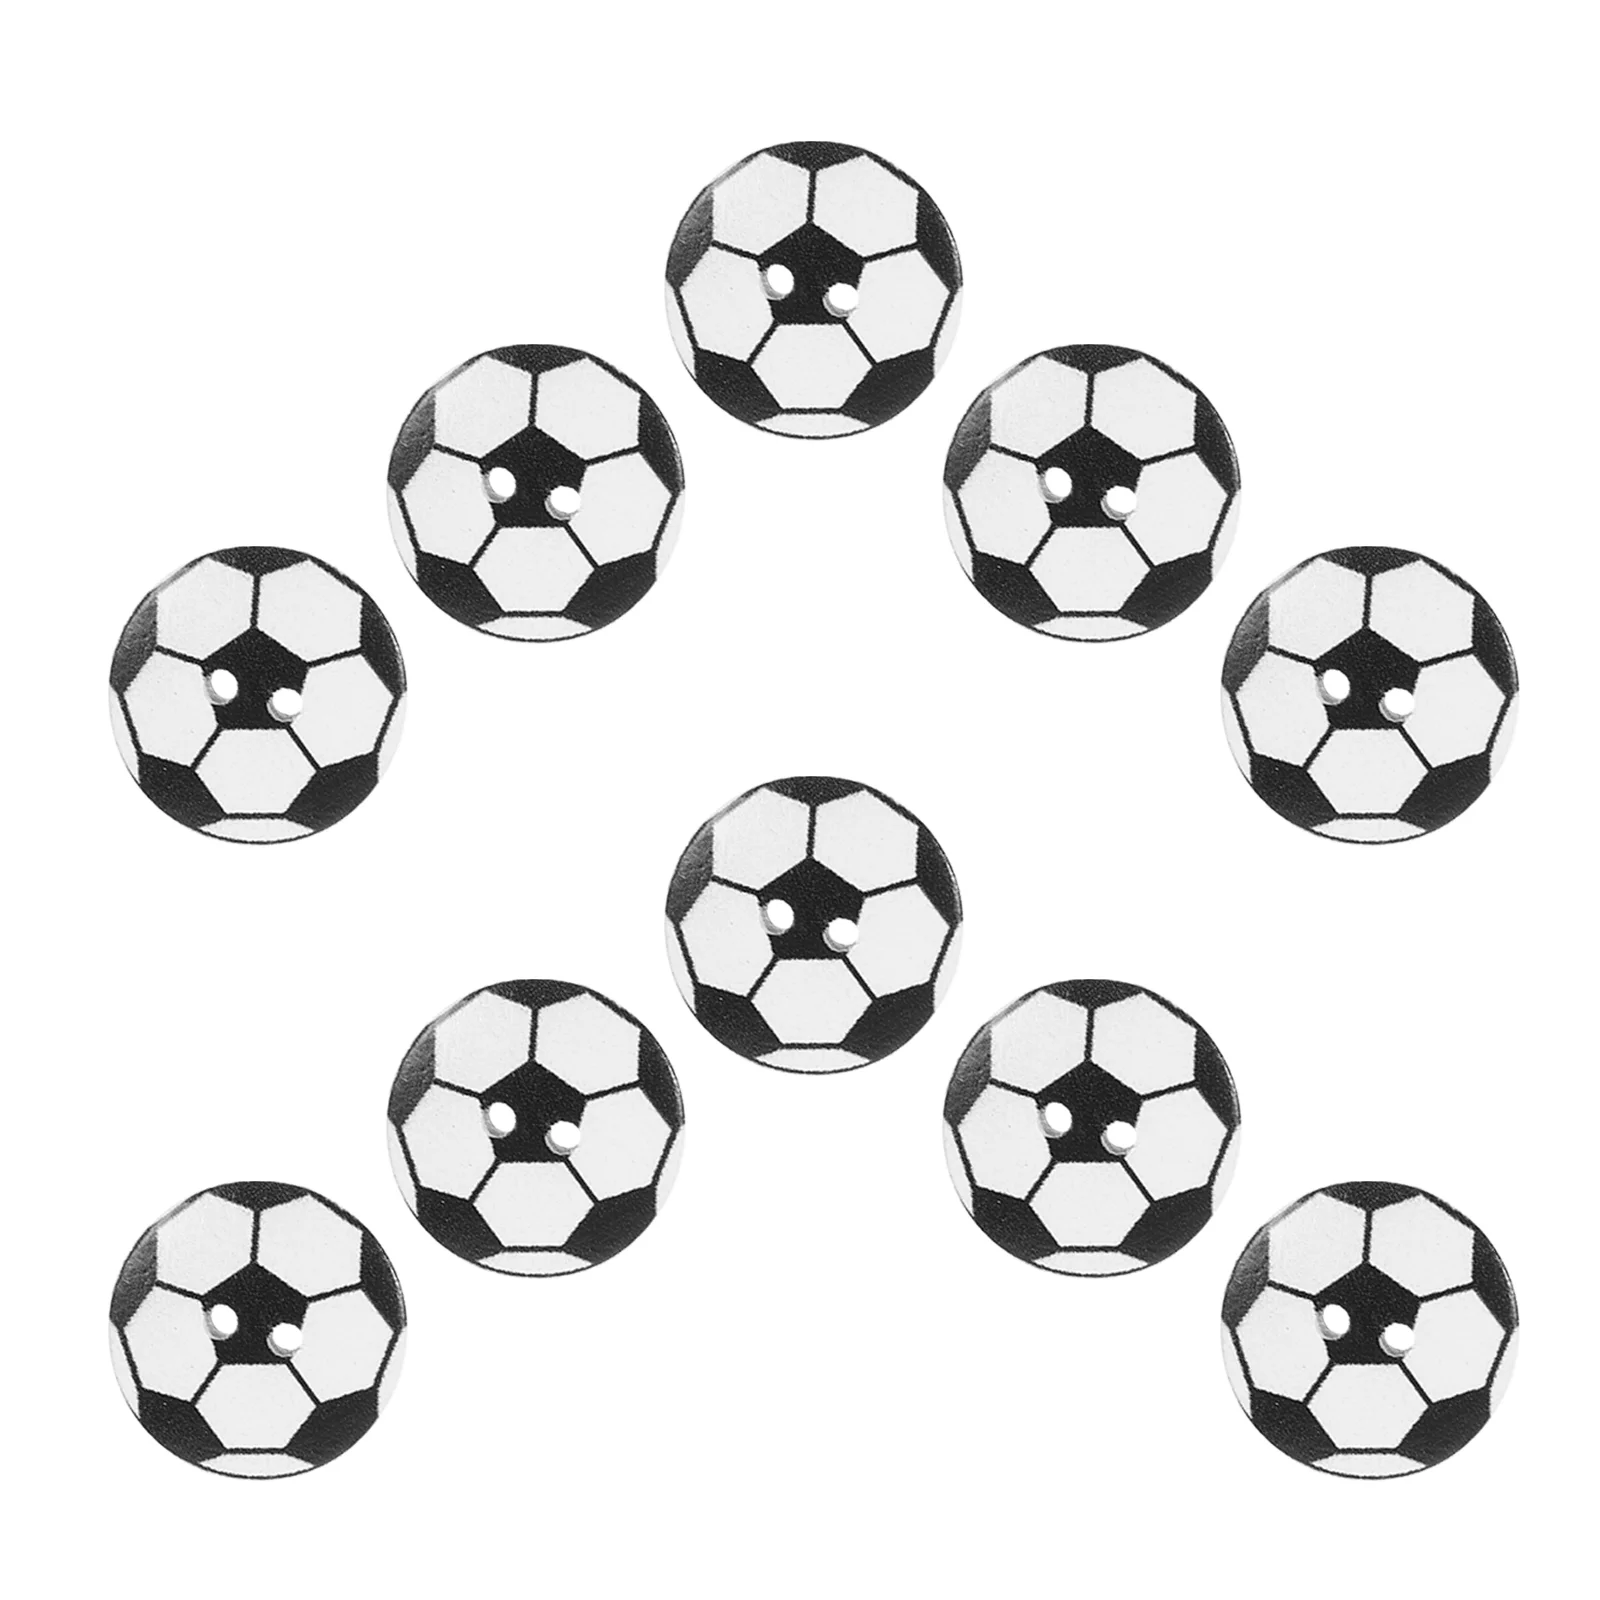 

Wooden Soccer Ball Buttons - 50pcs, 2 Holes, Flatback, for Crafts, Sewing, Knitting, Scrapbooking, DIY Embellishment